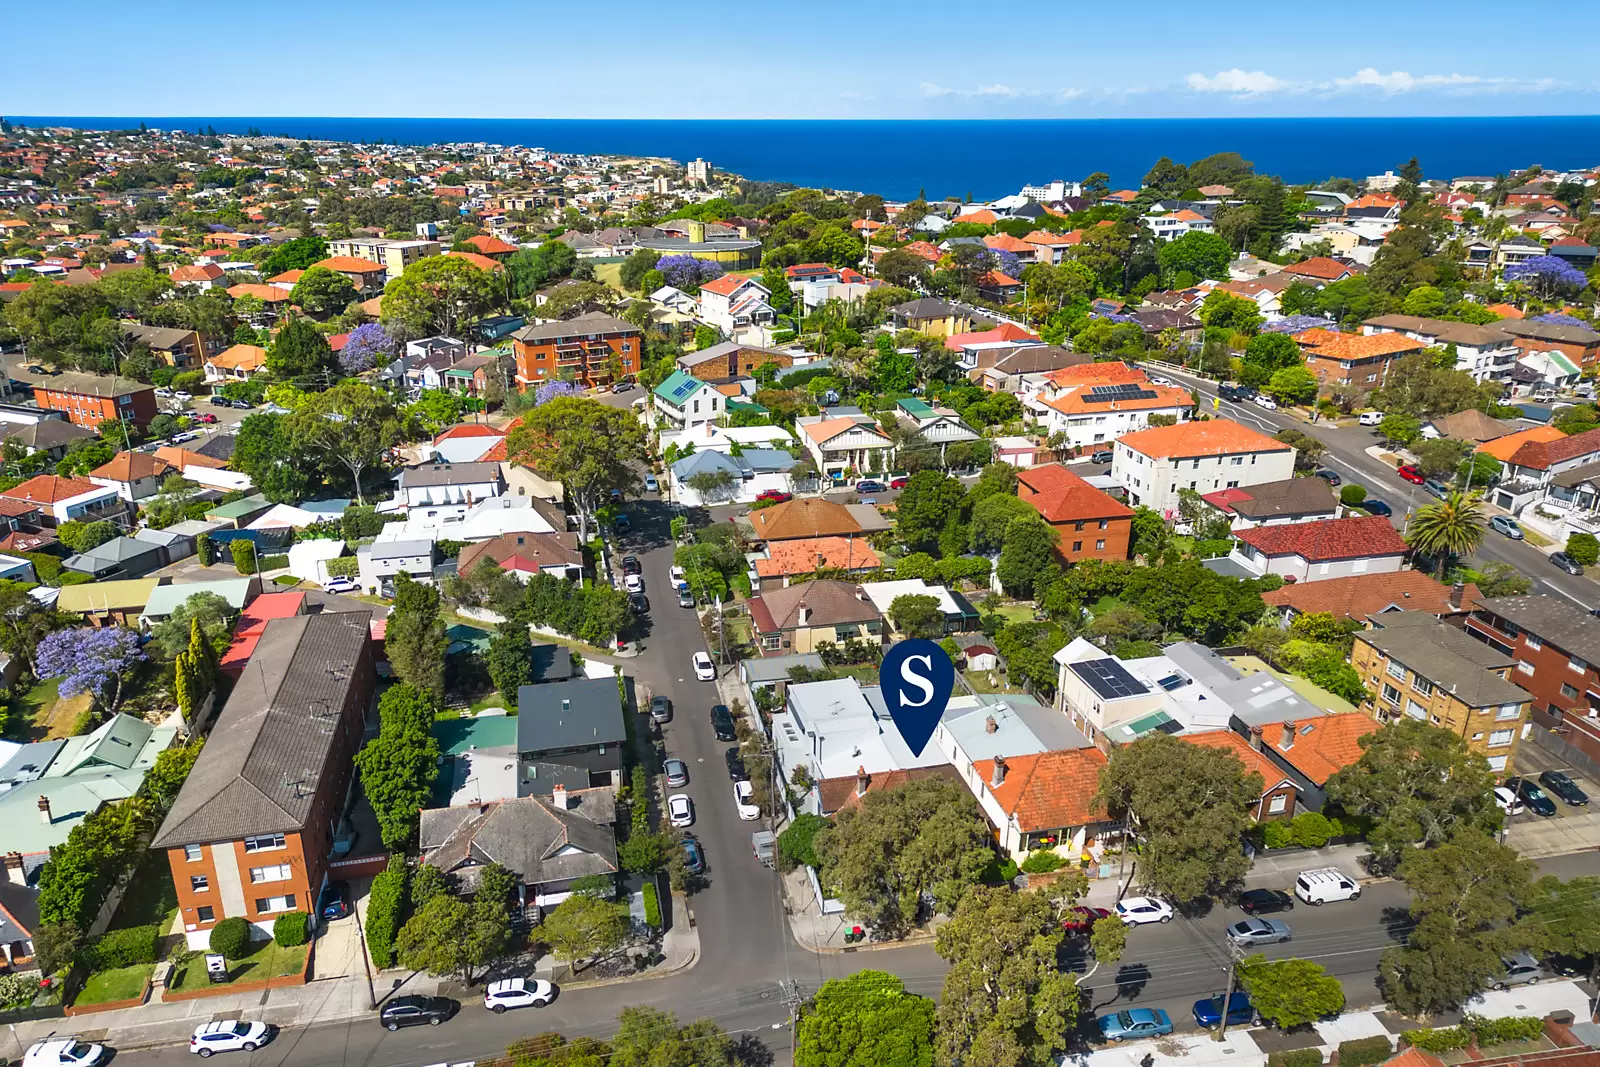 Photo #6: 127 Perouse Road, Randwick - Sold by Sydney Sotheby's International Realty